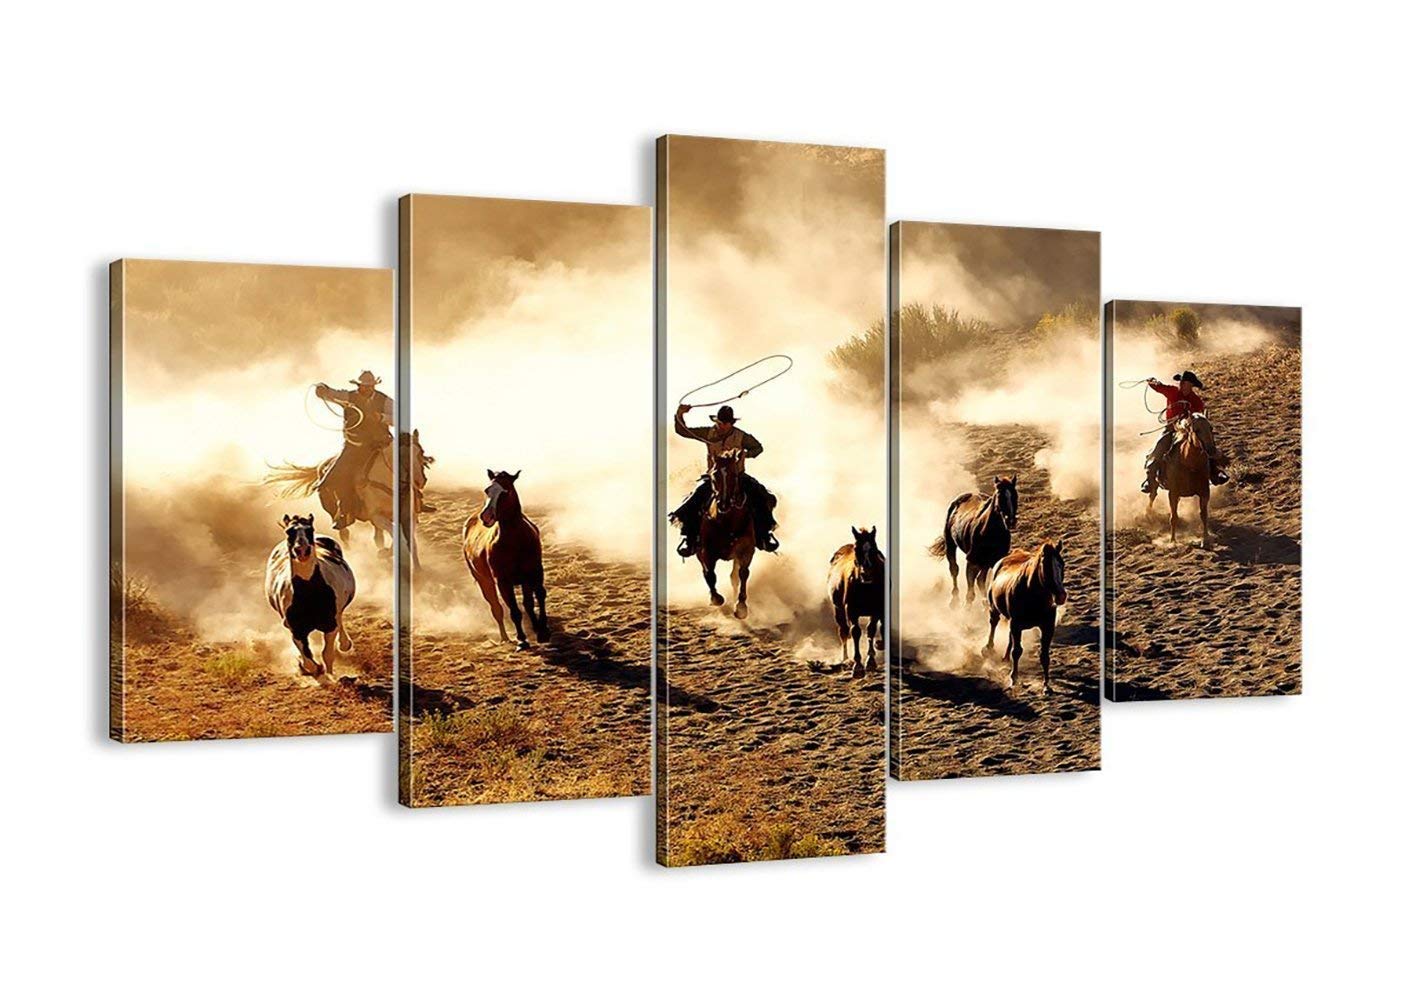 5 Piece Vintage Abstract Horses Running in the Desert Painting Retro Canvas Cowboy Wall Art Horse Prints Framed Ready to Hang Giclee Prints Fine Ar...